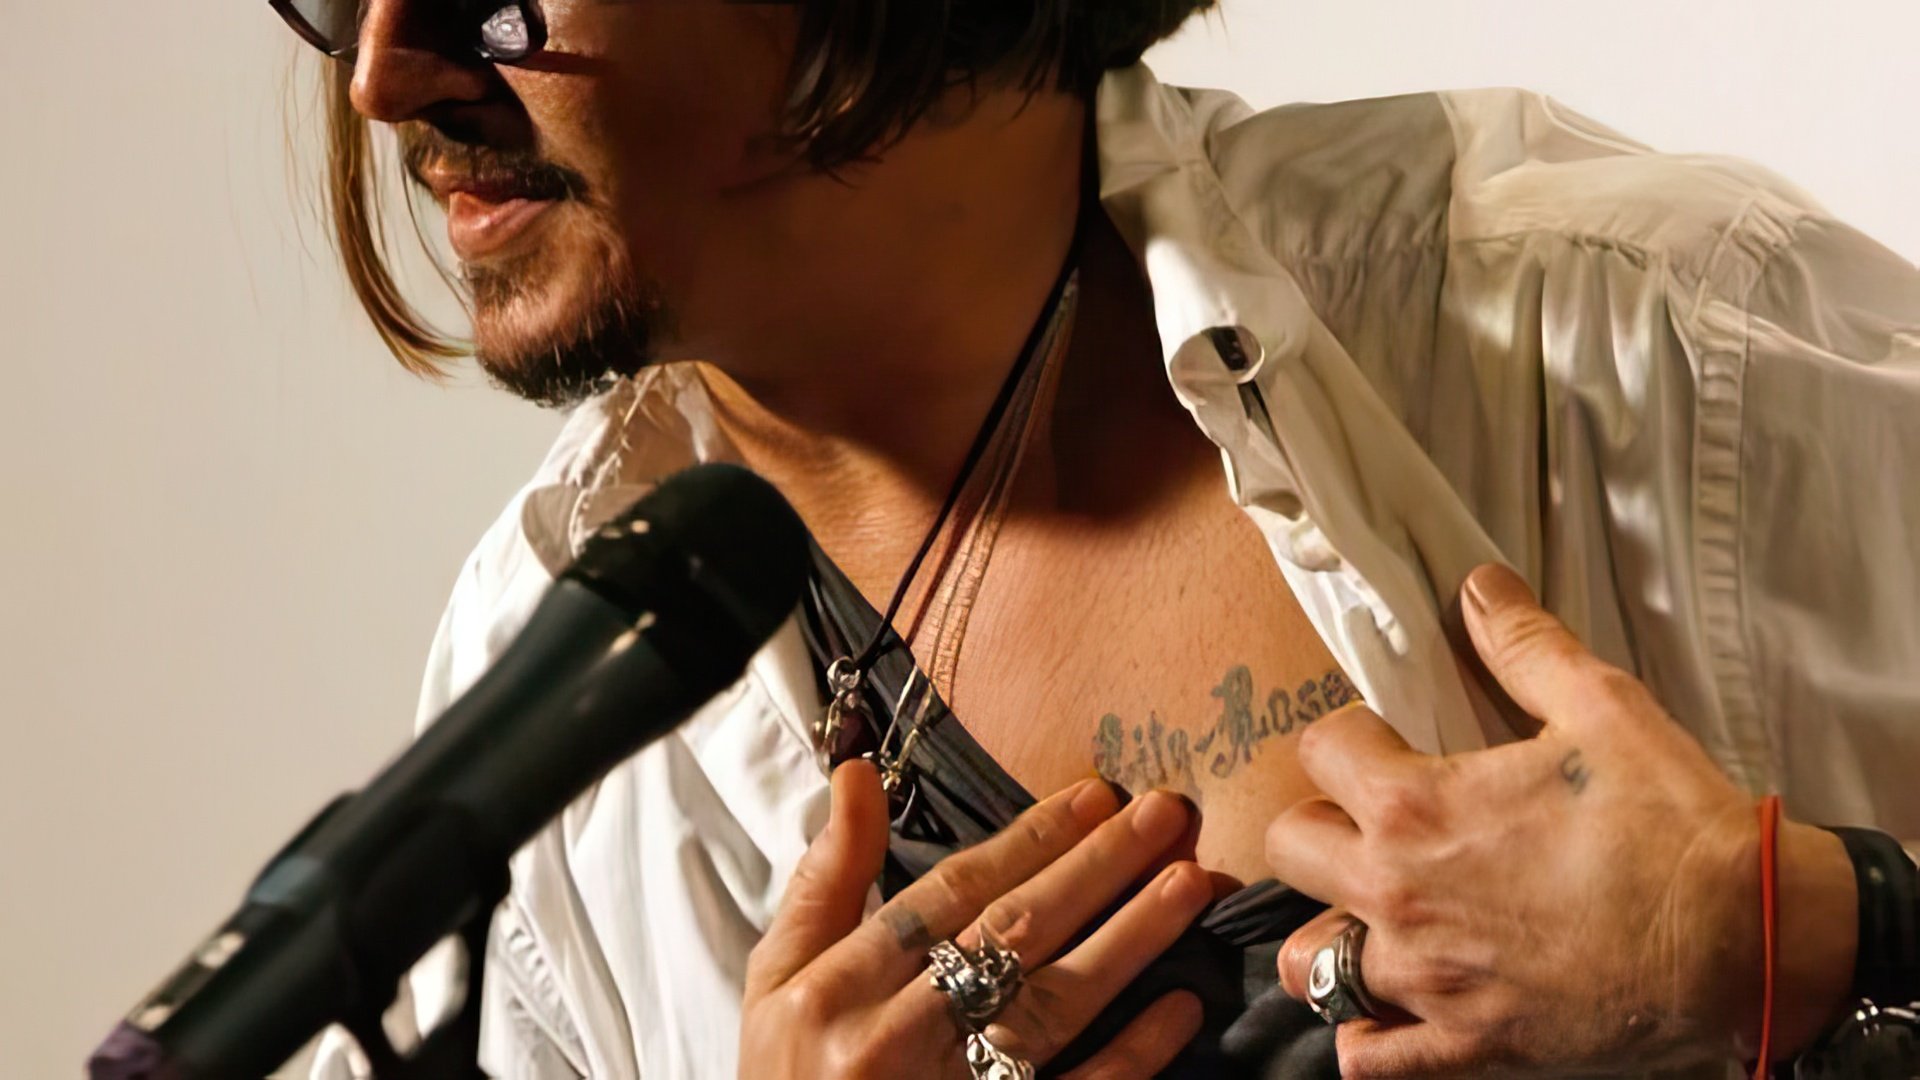 Johnny Depp’s tattoo with his daughter’s name